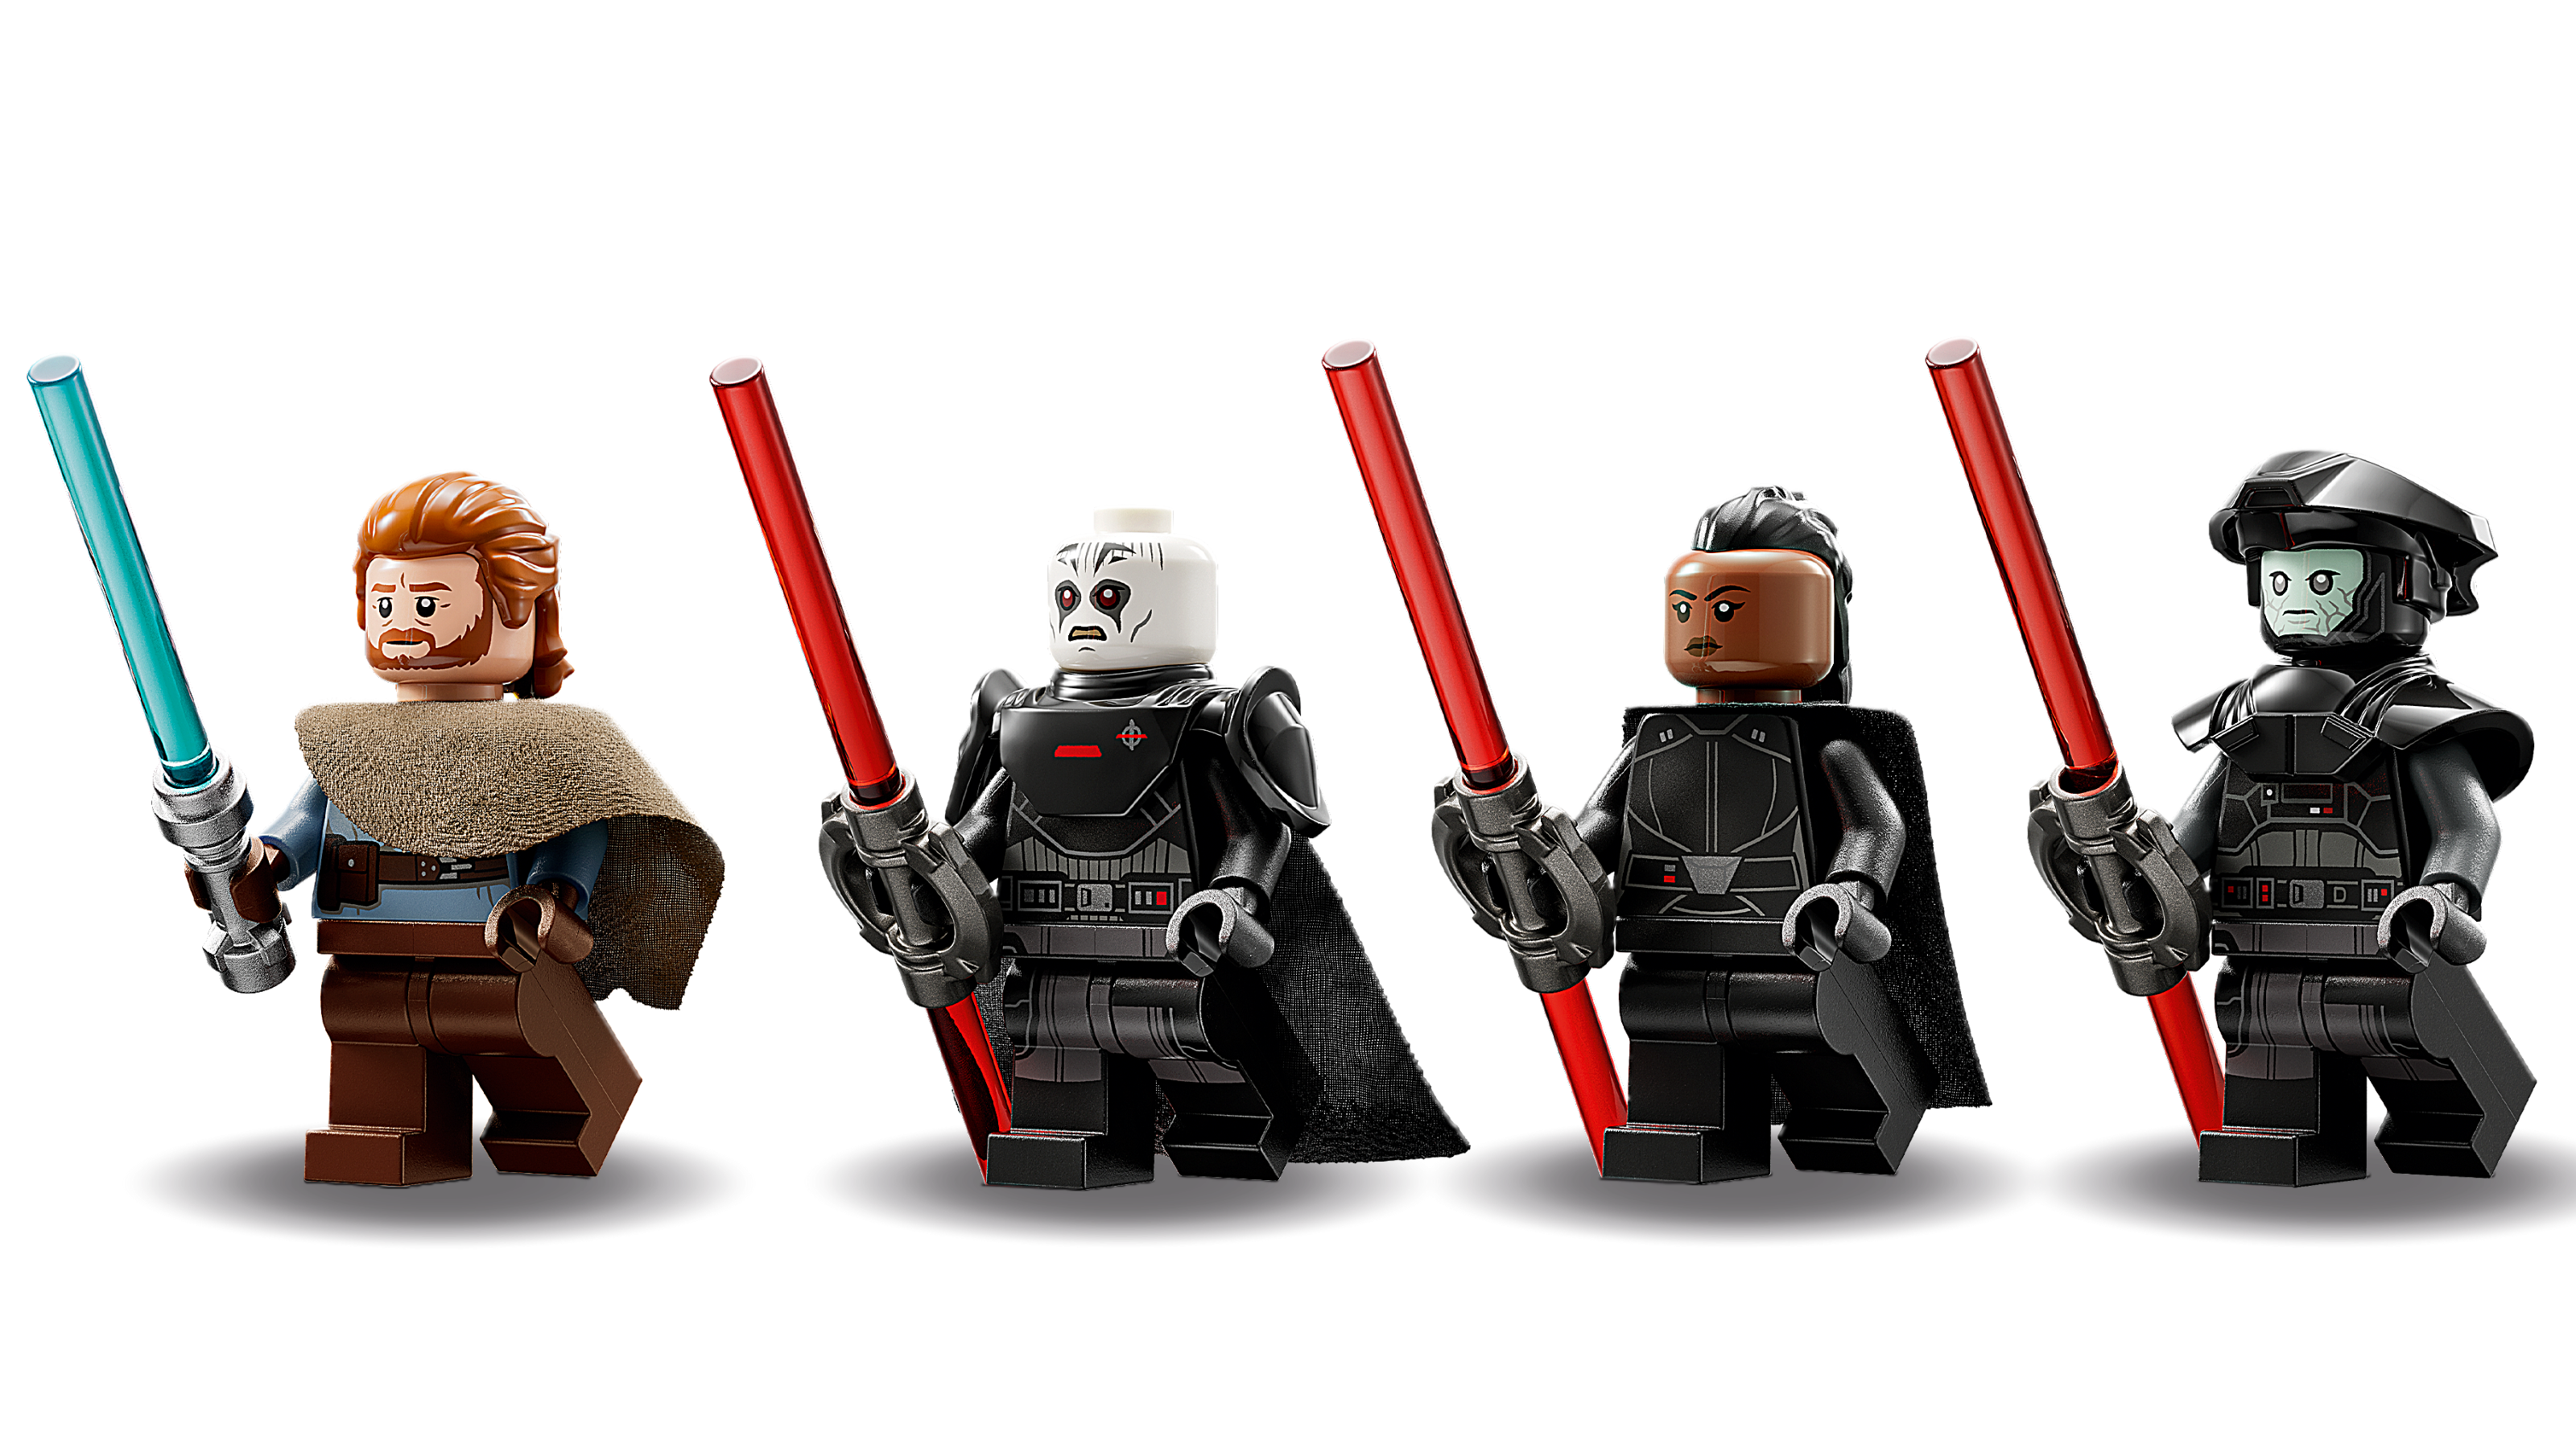 LEGO Star Wars Inquisitor Transport Scythe 75336 Buildable Toy Starship,  Obi-Wan Kenobi Set, Ben Kenobi Minifigure with Blue and Double-Bladed Red  Lightsabers 